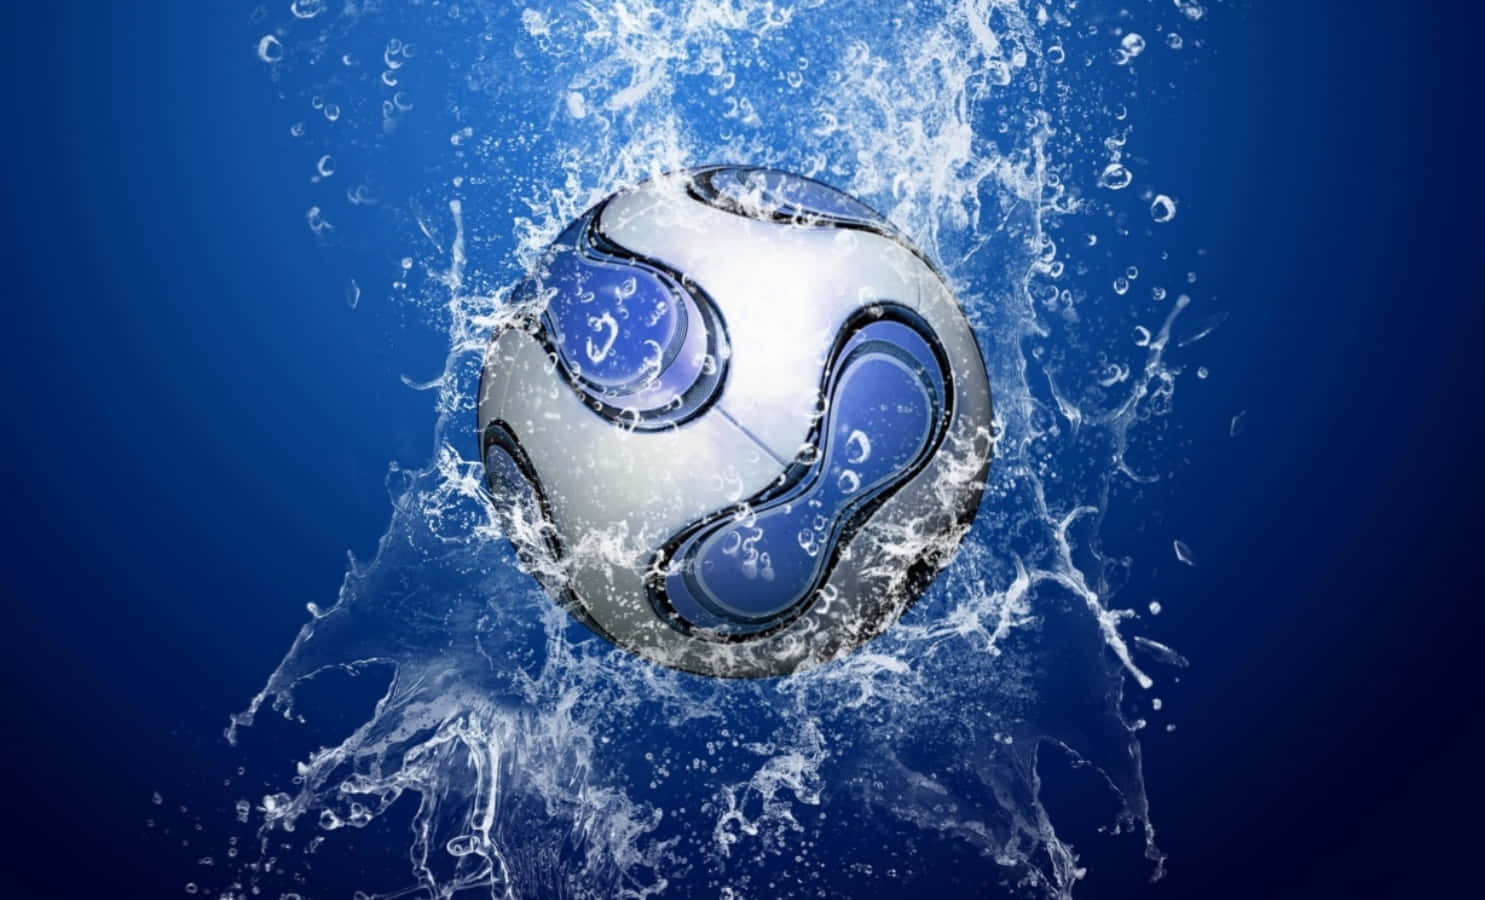 Soccer Ball In Water Pictures